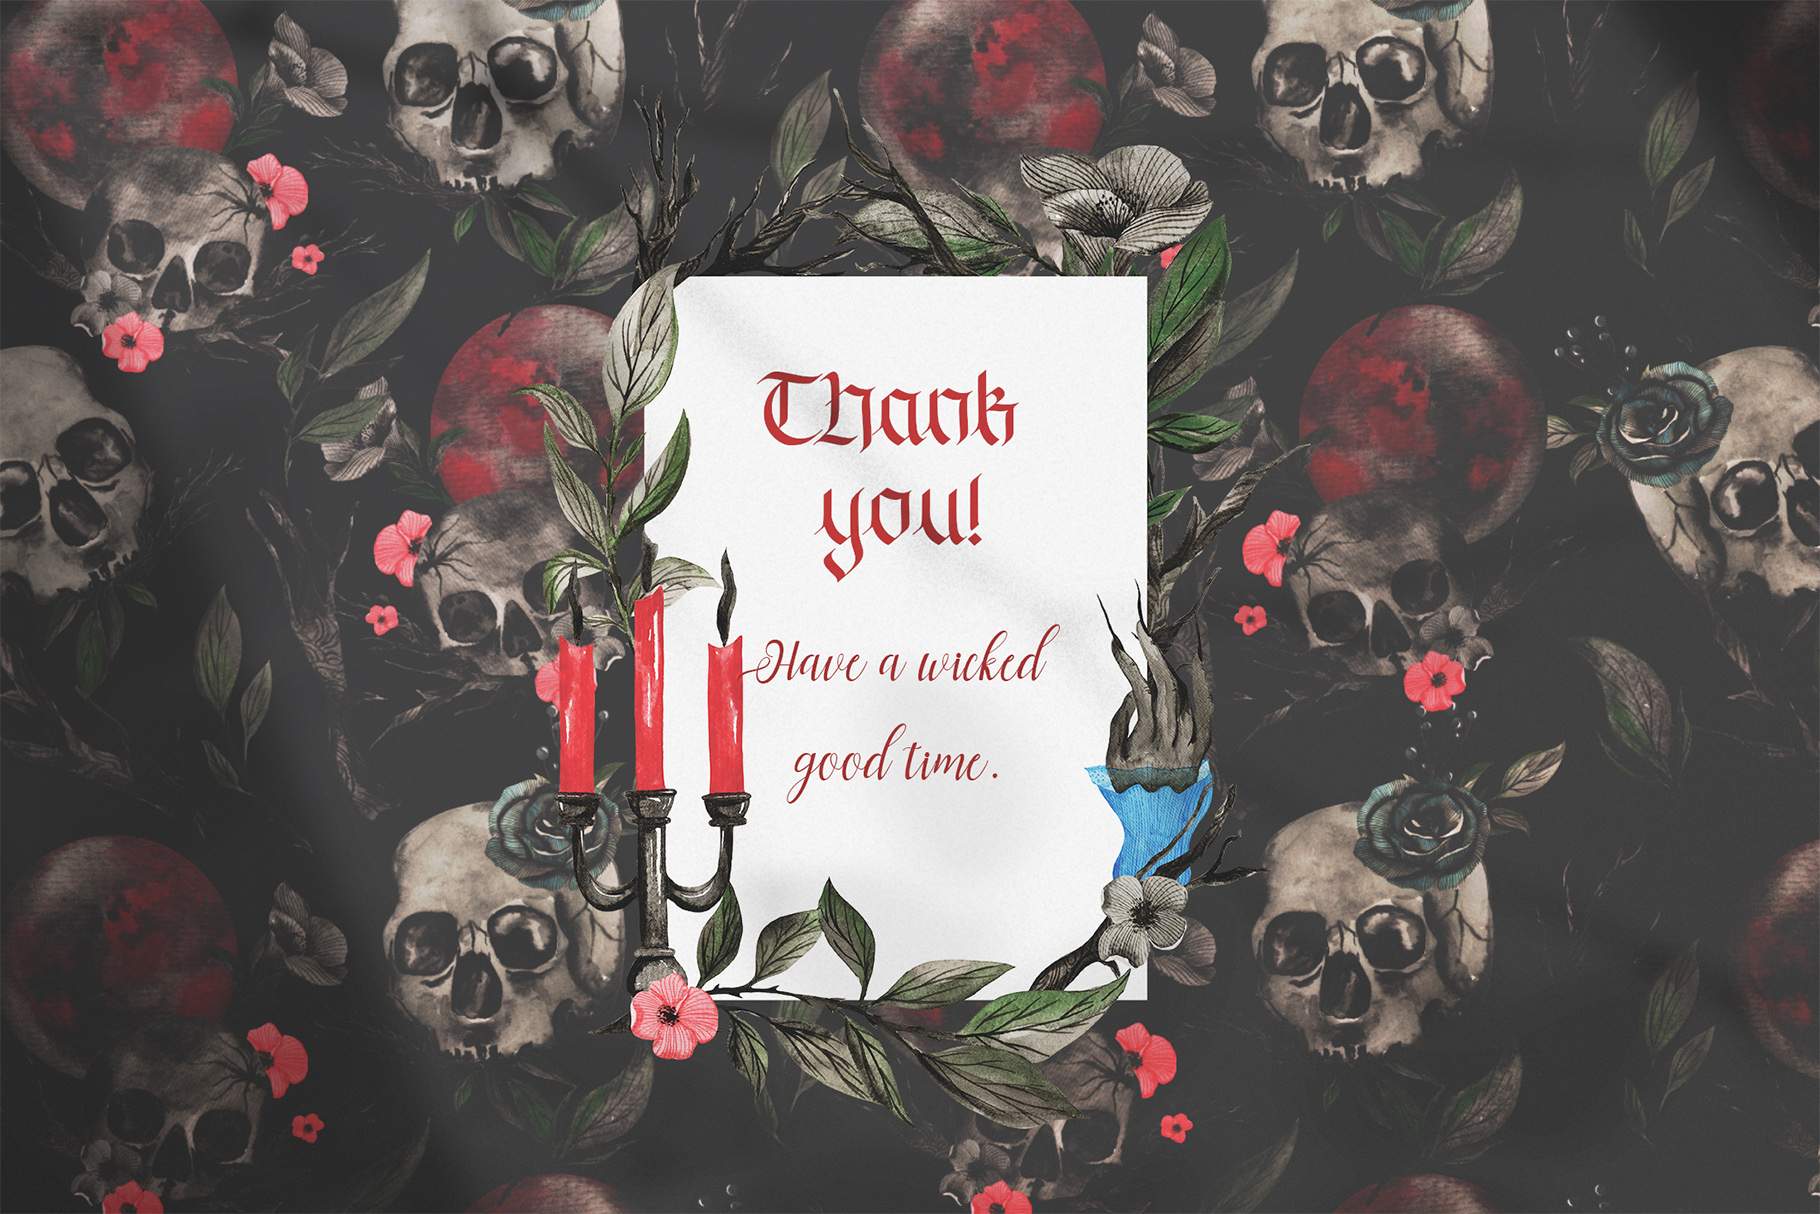 Thank you card with skulls and flowers.